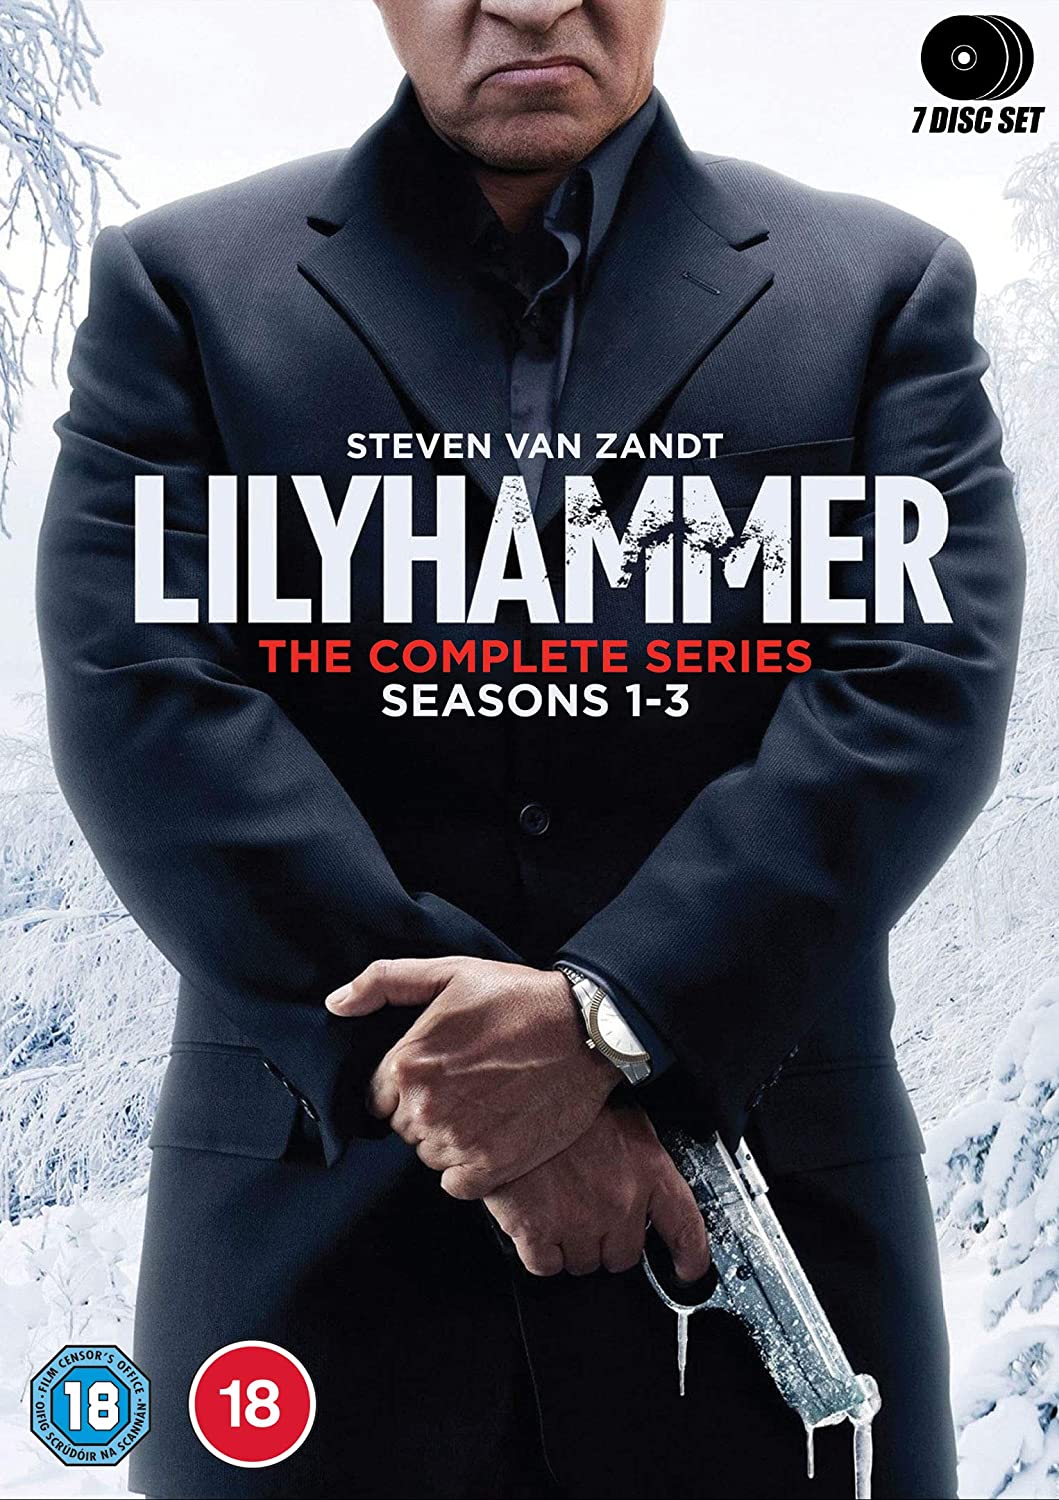 boom competitions -  win Lilyhammer The Complete Series boxset